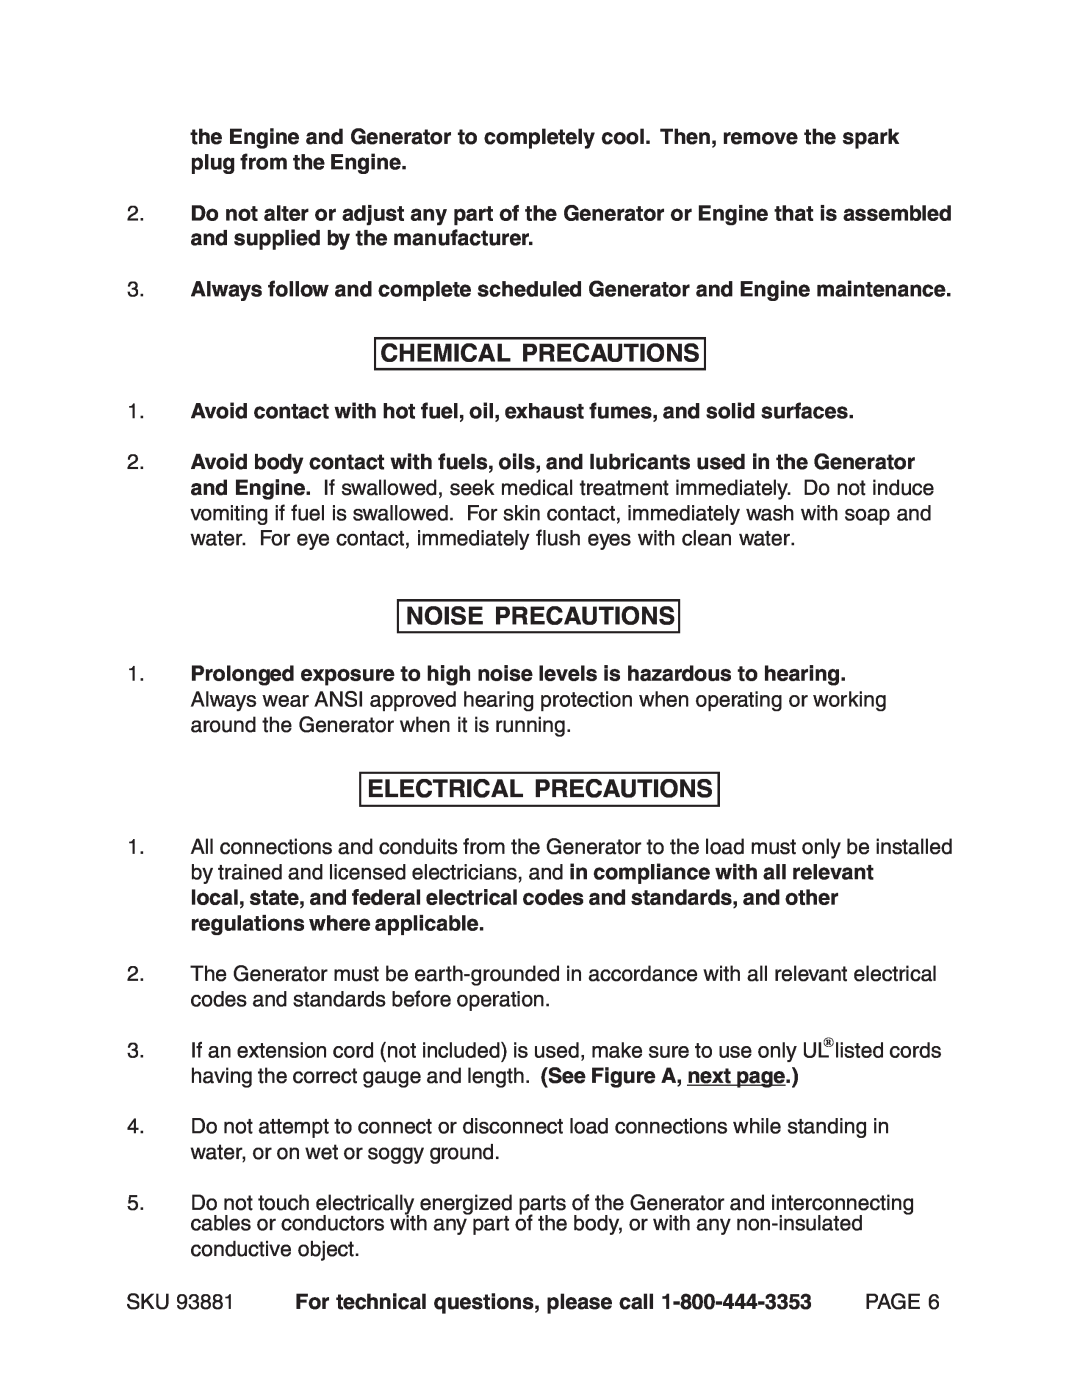 Chicago Electric 93881 operating instructions Chemical Precautions, Noise Precautions, Electrical Precautions 